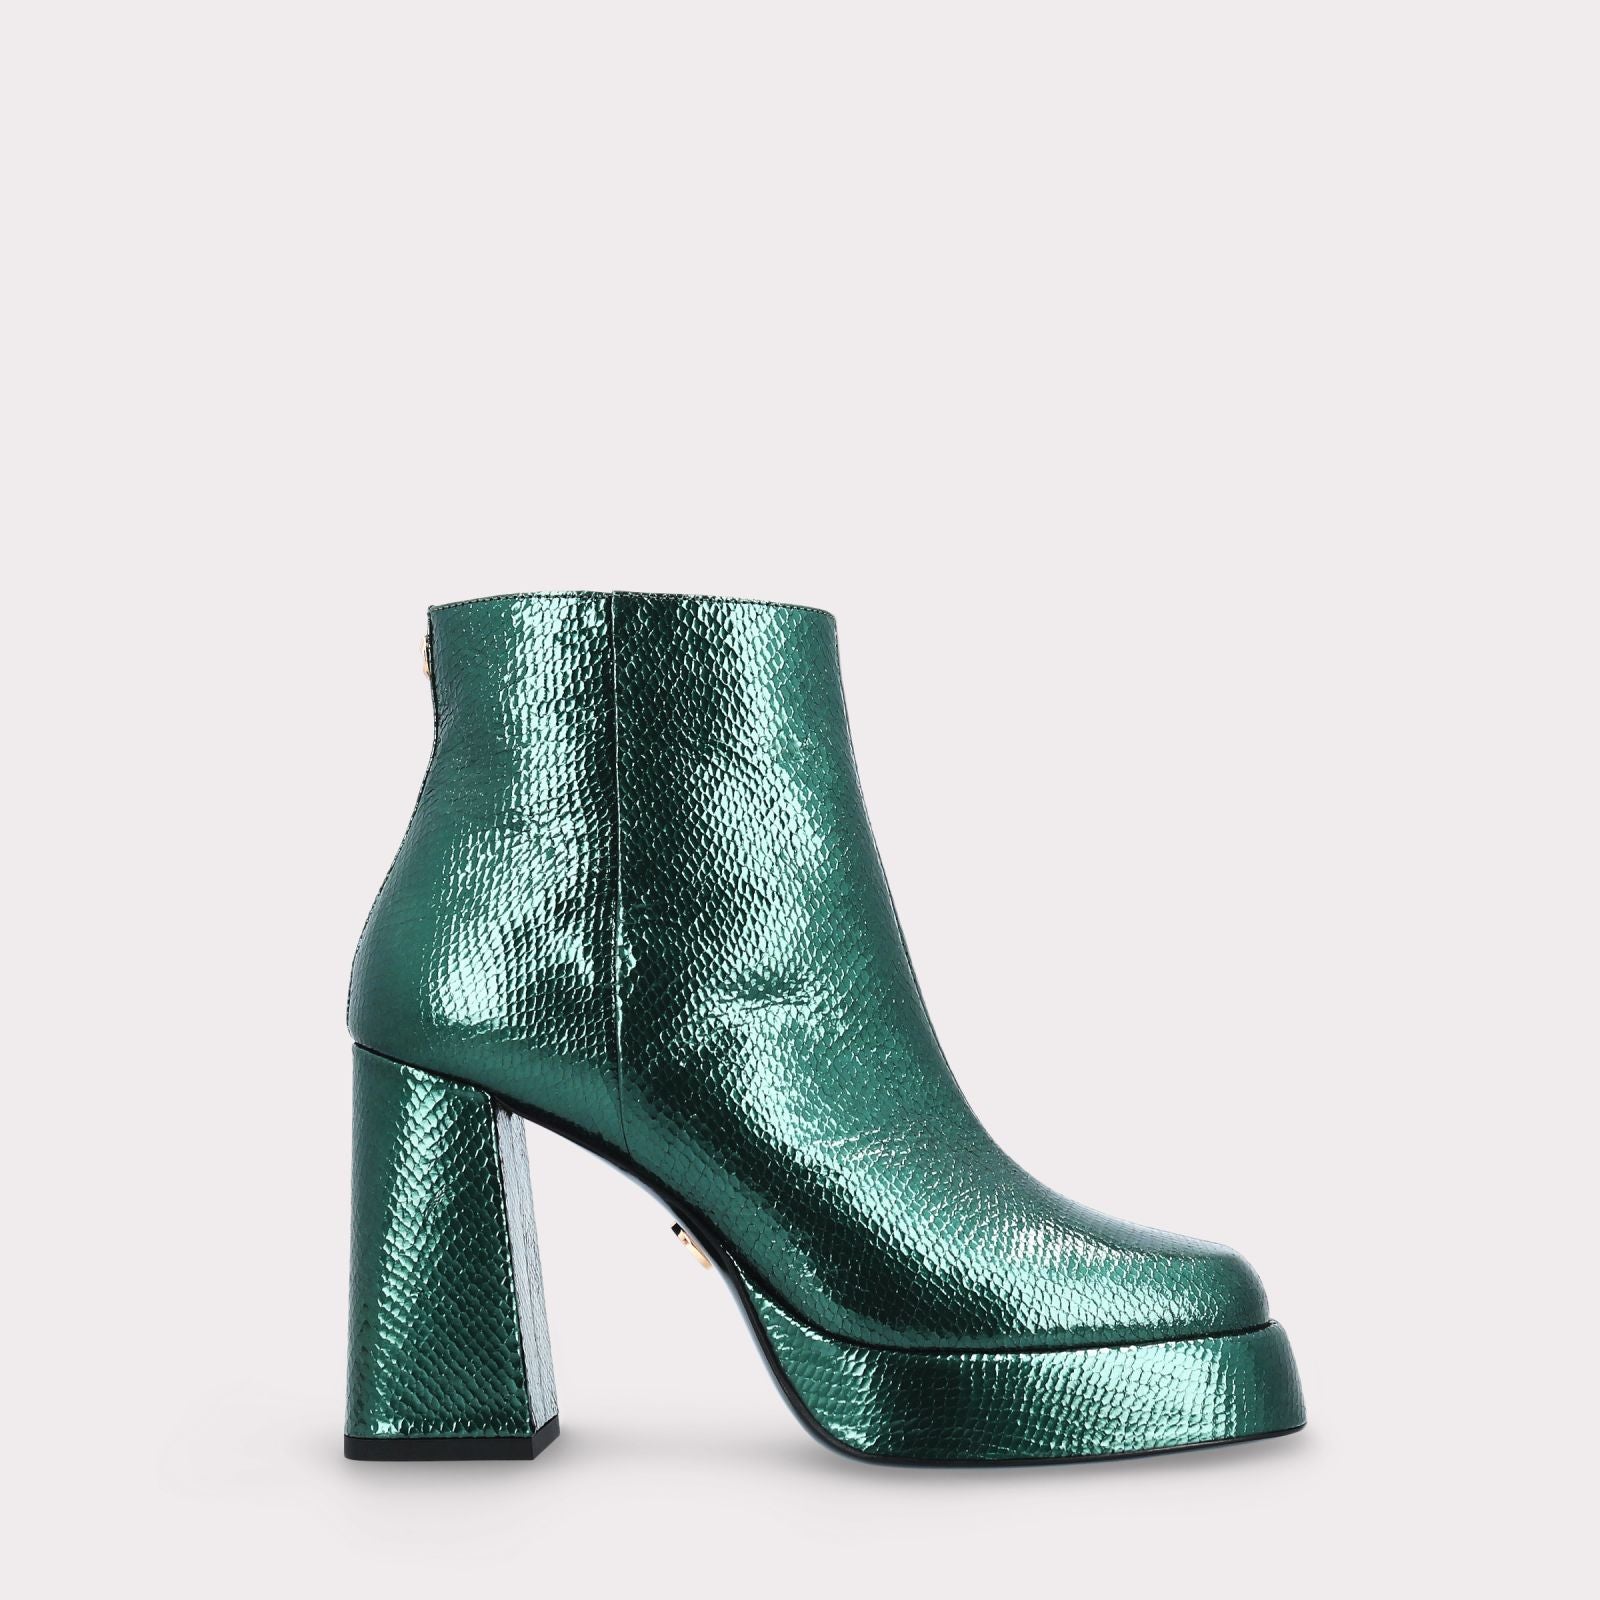 CINDY ZIP 02 MOSS GREEN MINI VIPER  EMBOSSED LEATHER PLATFORM ANKLE BOOTS